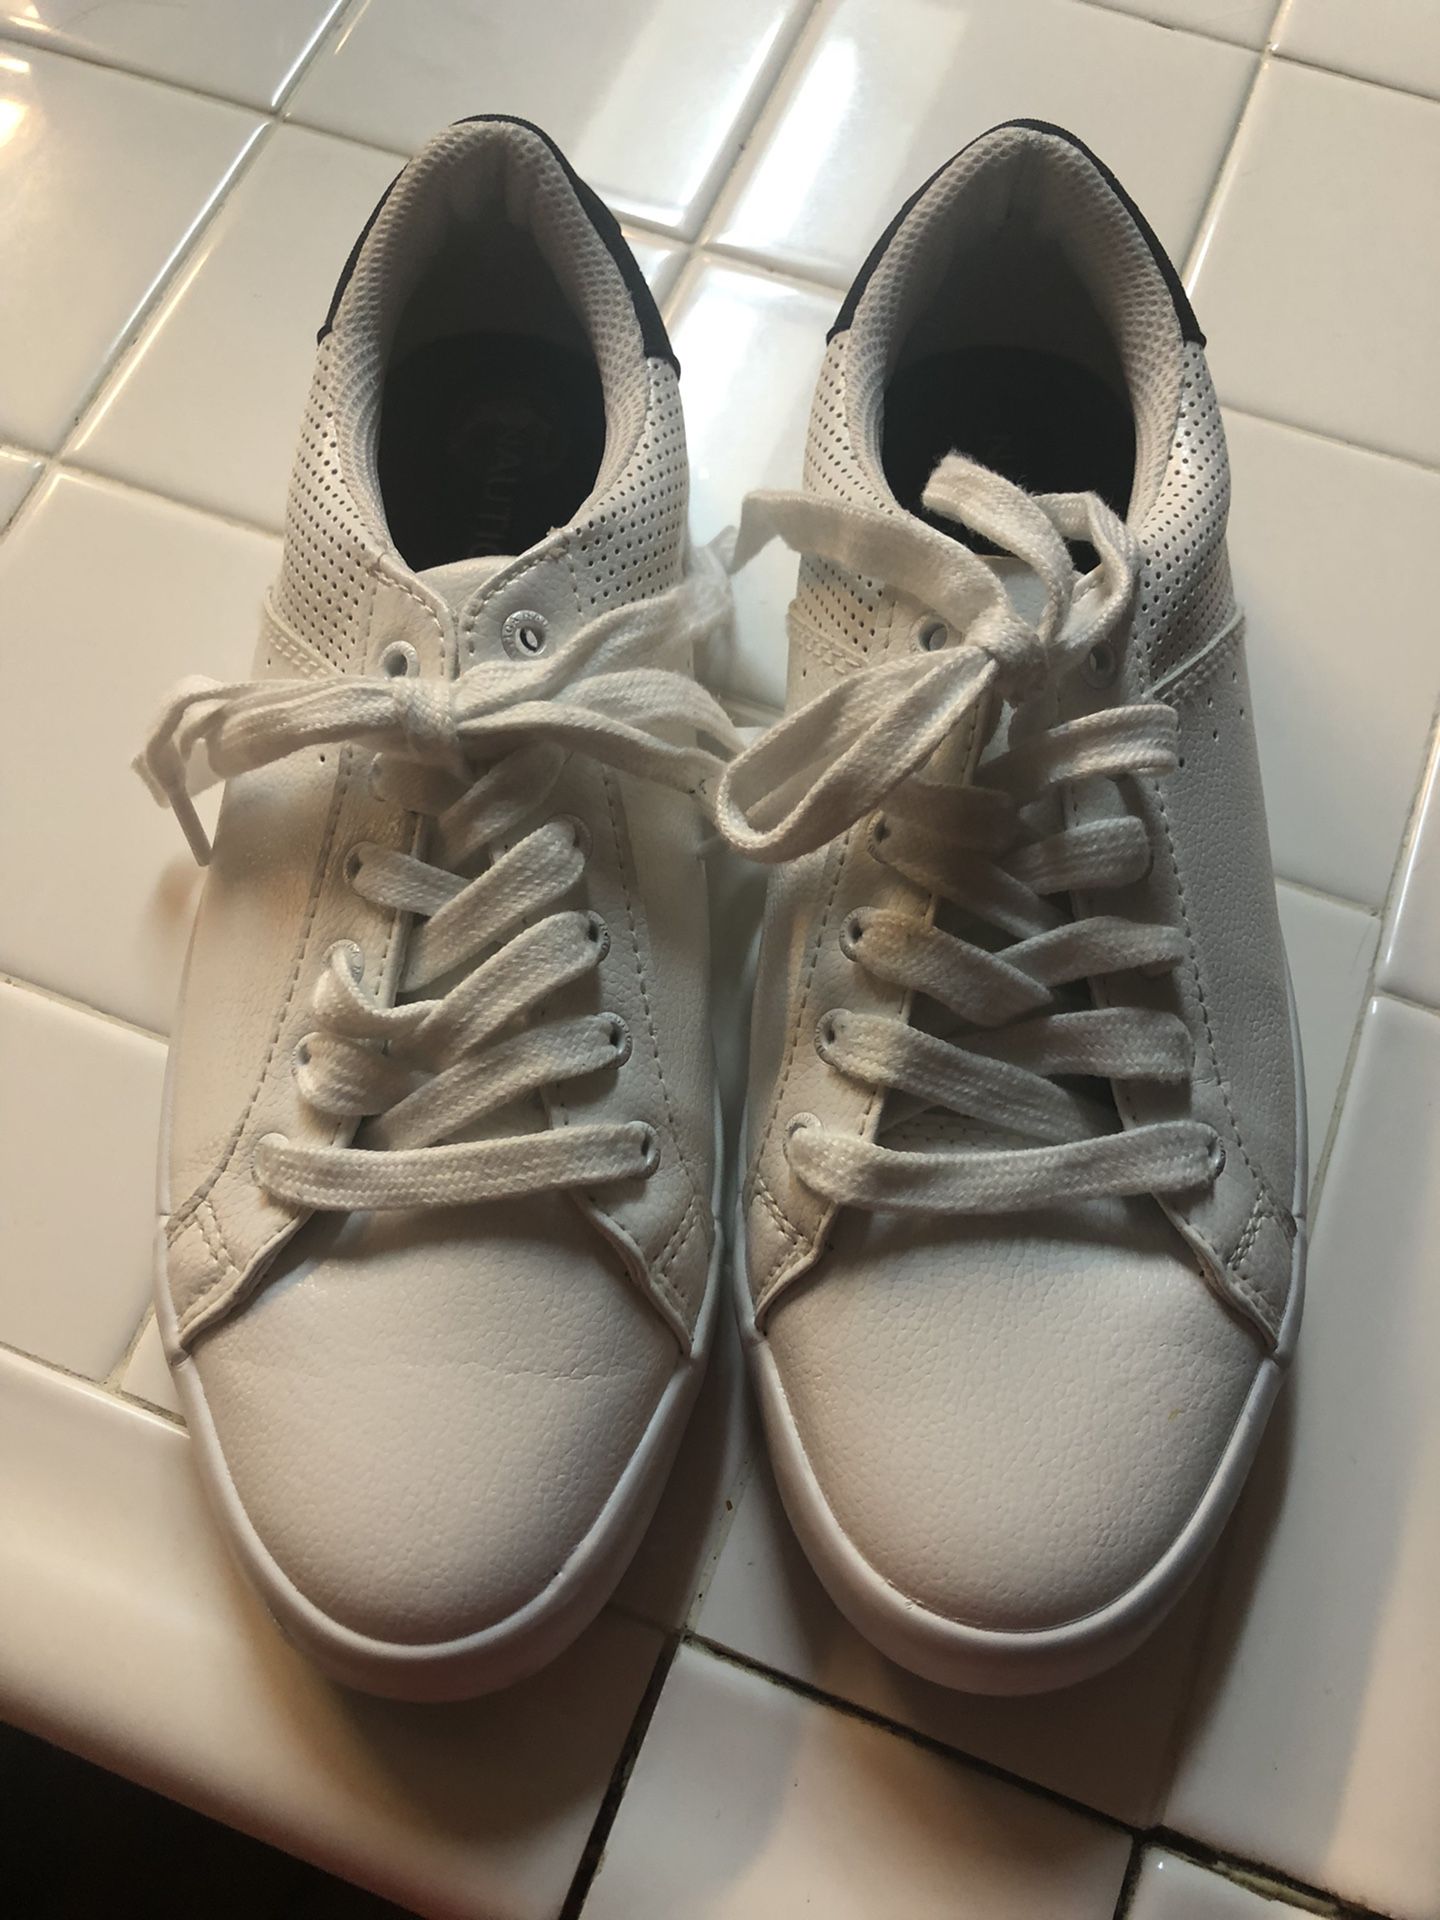 Nautical white size 8 shoes, used but in good condition